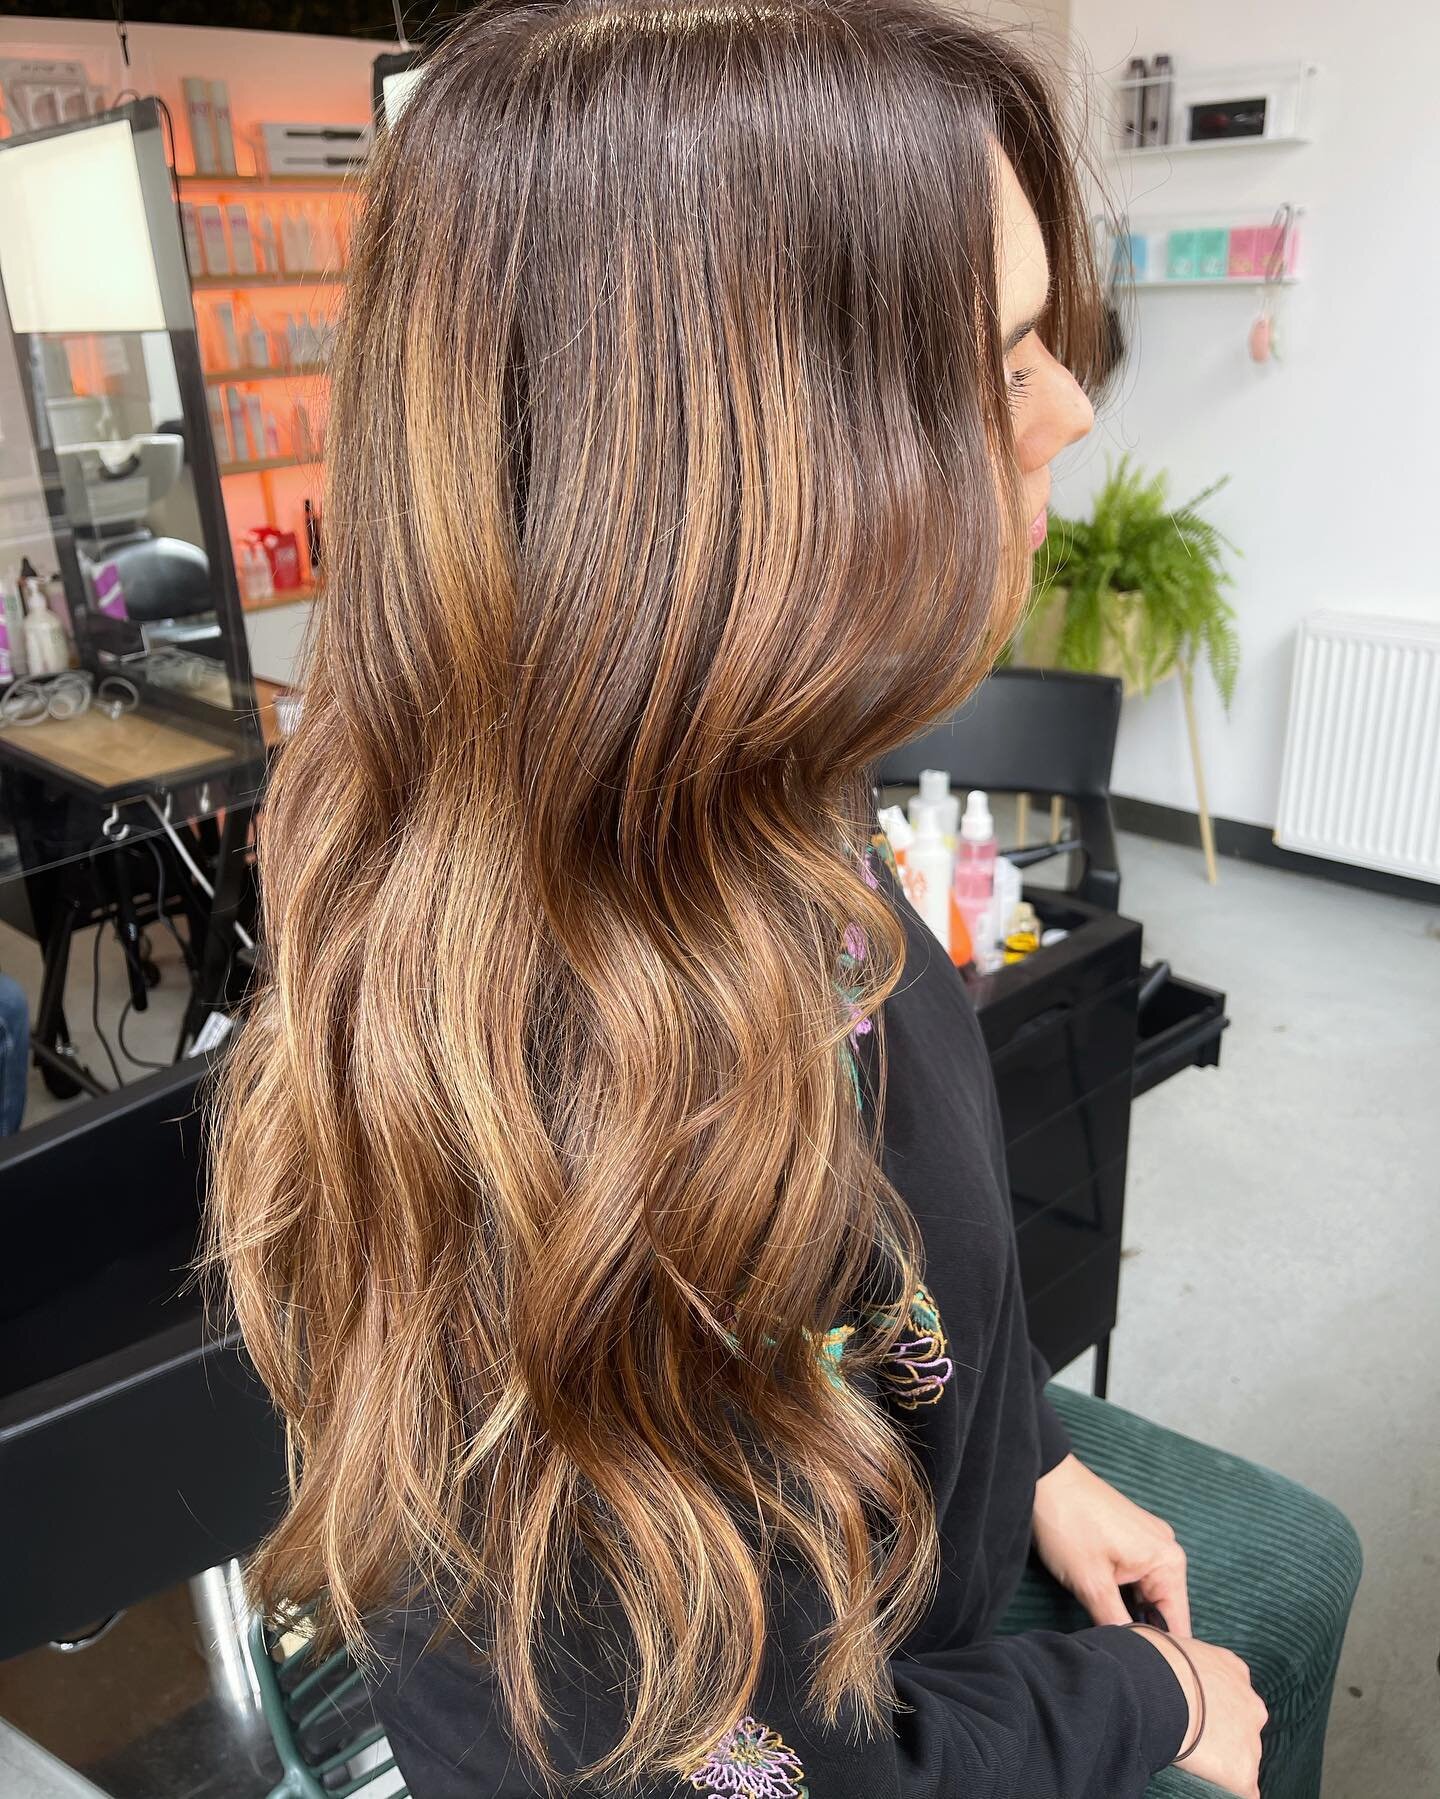 HONEY BALAYAGE 🍯

Honey balayage is a golden mean between highlights in blonde and brown. That&rsquo;s why it looks great on almost any base hair color. One of my favorites for a brunette. 
_______________________________________
Wil jij gekleurd of